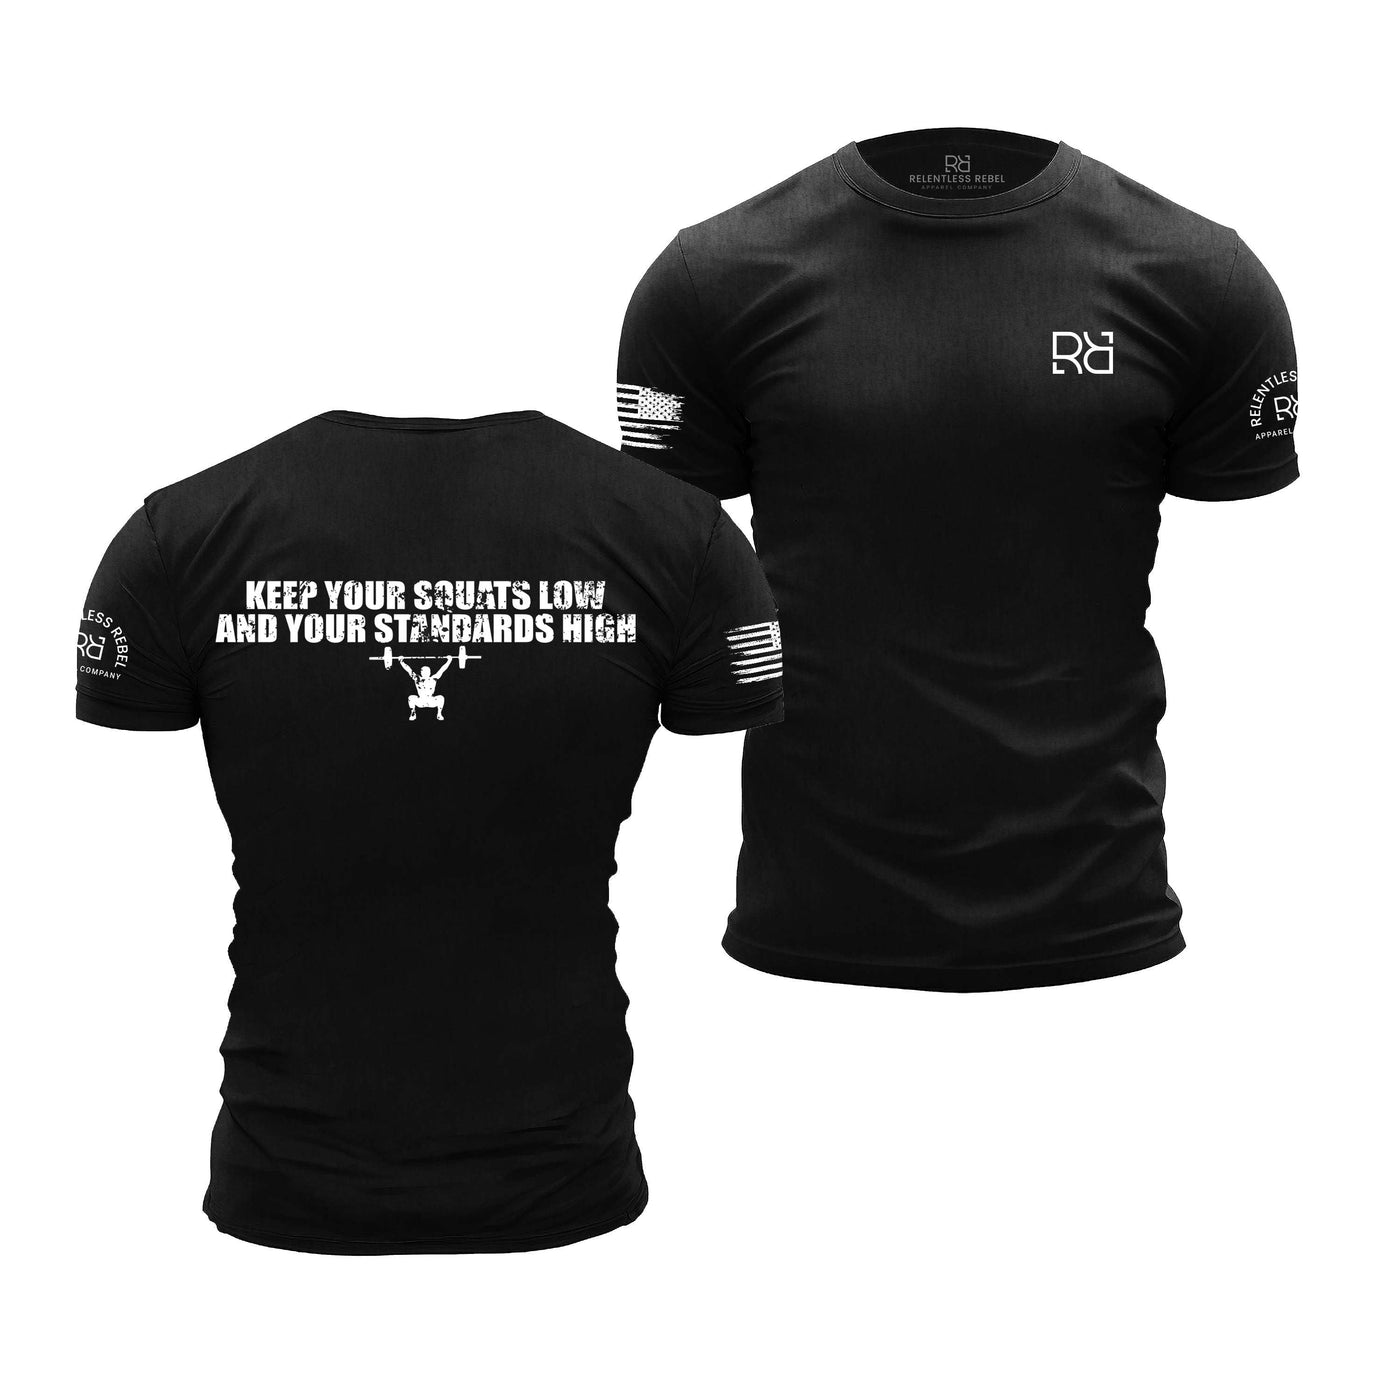 Solid Black Men's Keep Your Squats Low and Your Standards High Back Design Tee